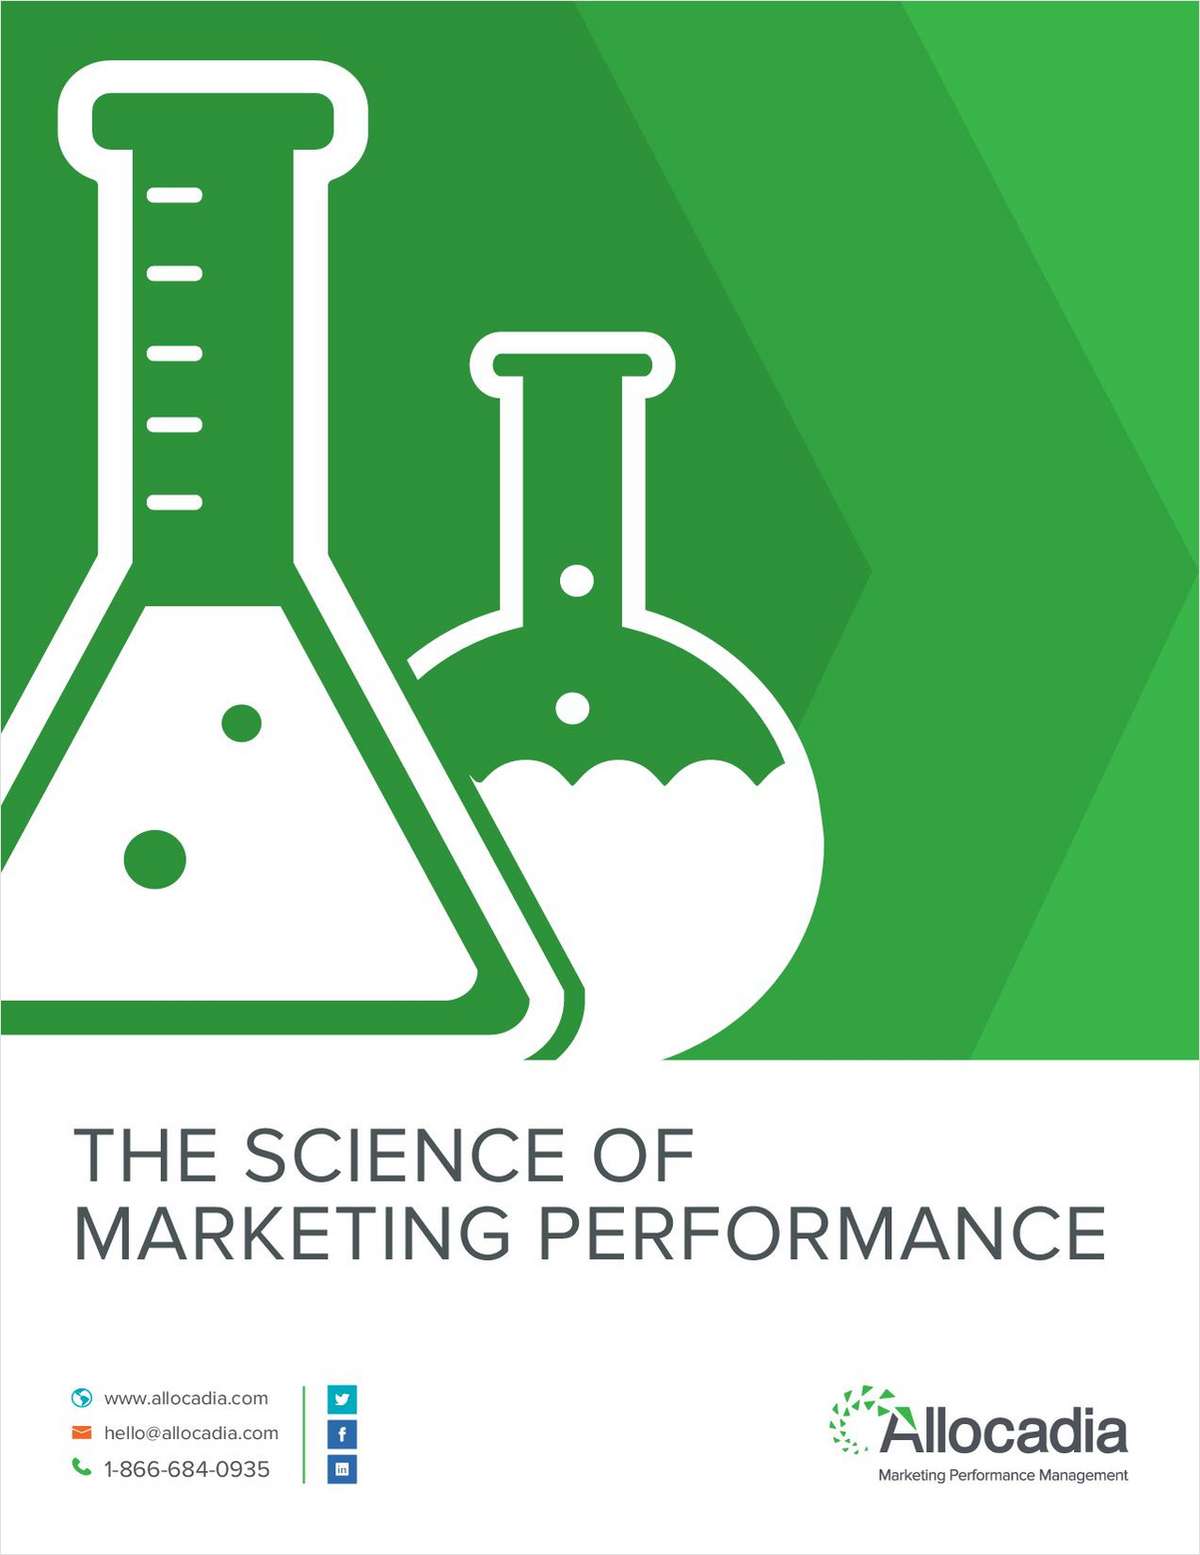 The Science of Marketing Performance